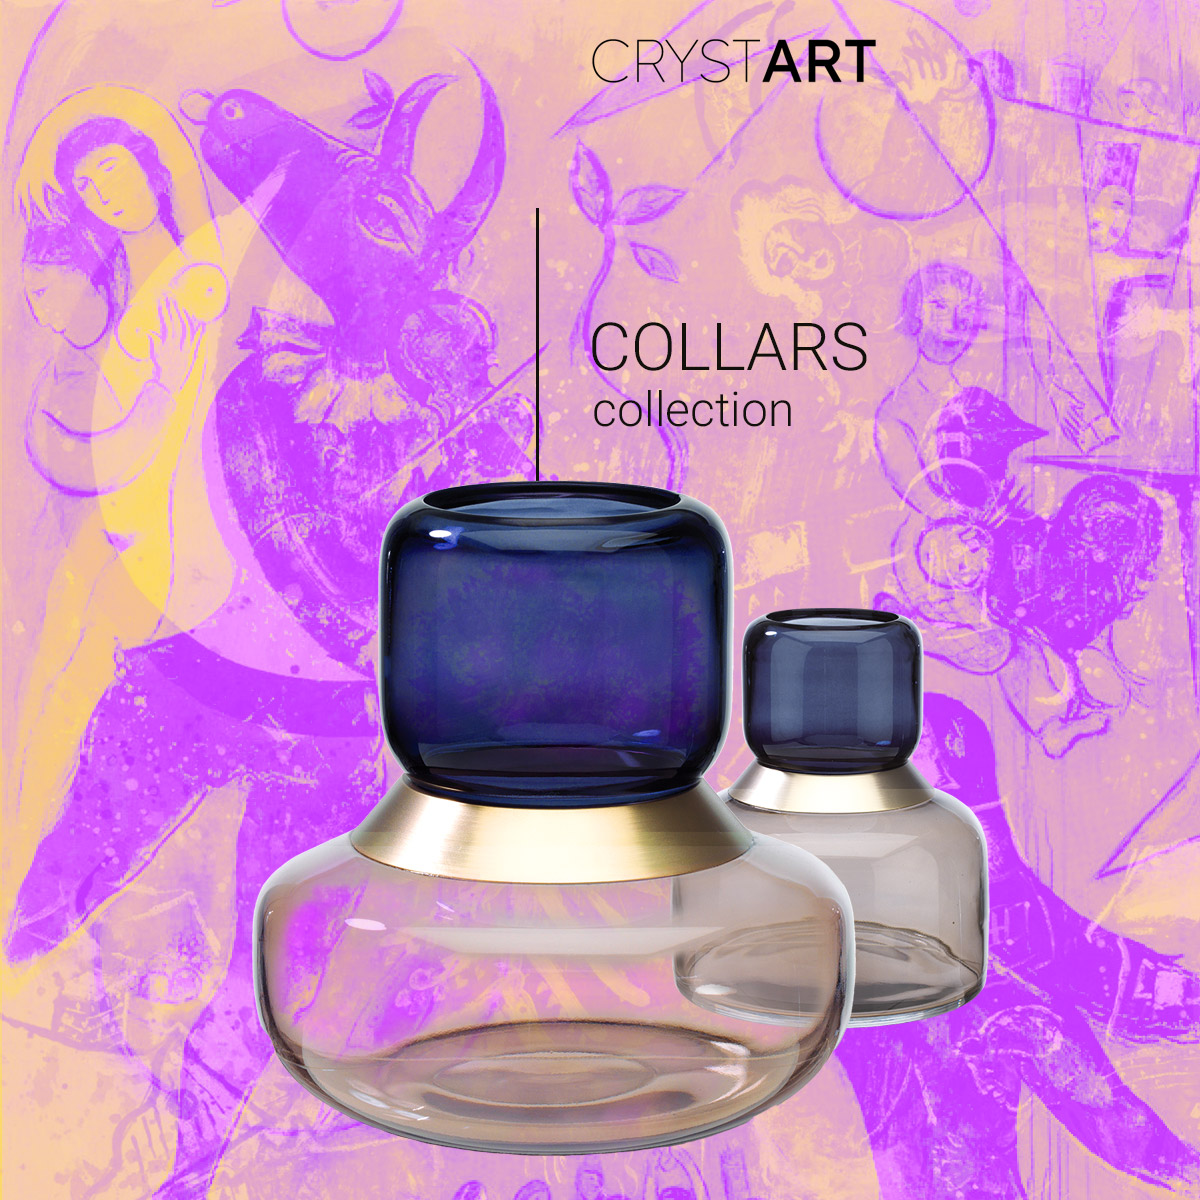 collars collection crystart